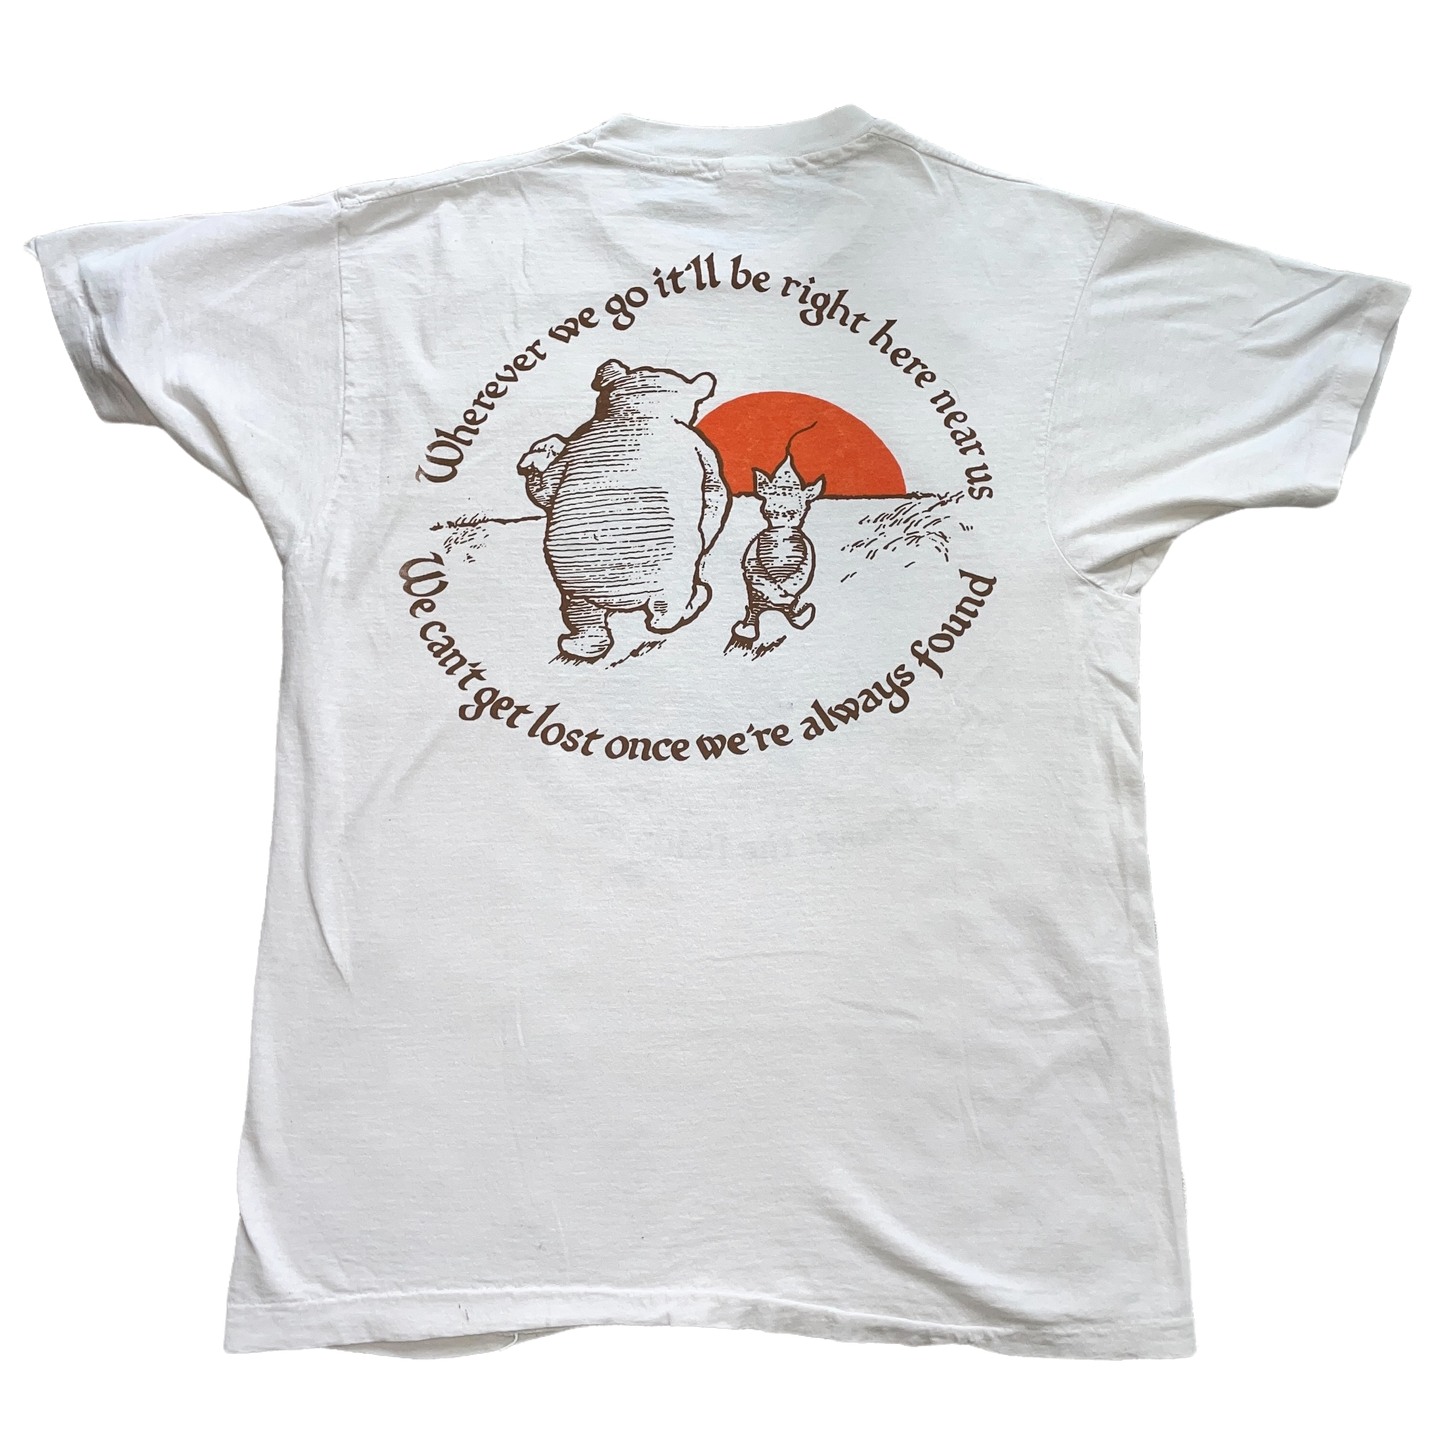 1990 Grateful Dead "Birds to Cheer Us" Pooh and Piglet Graphic Tee